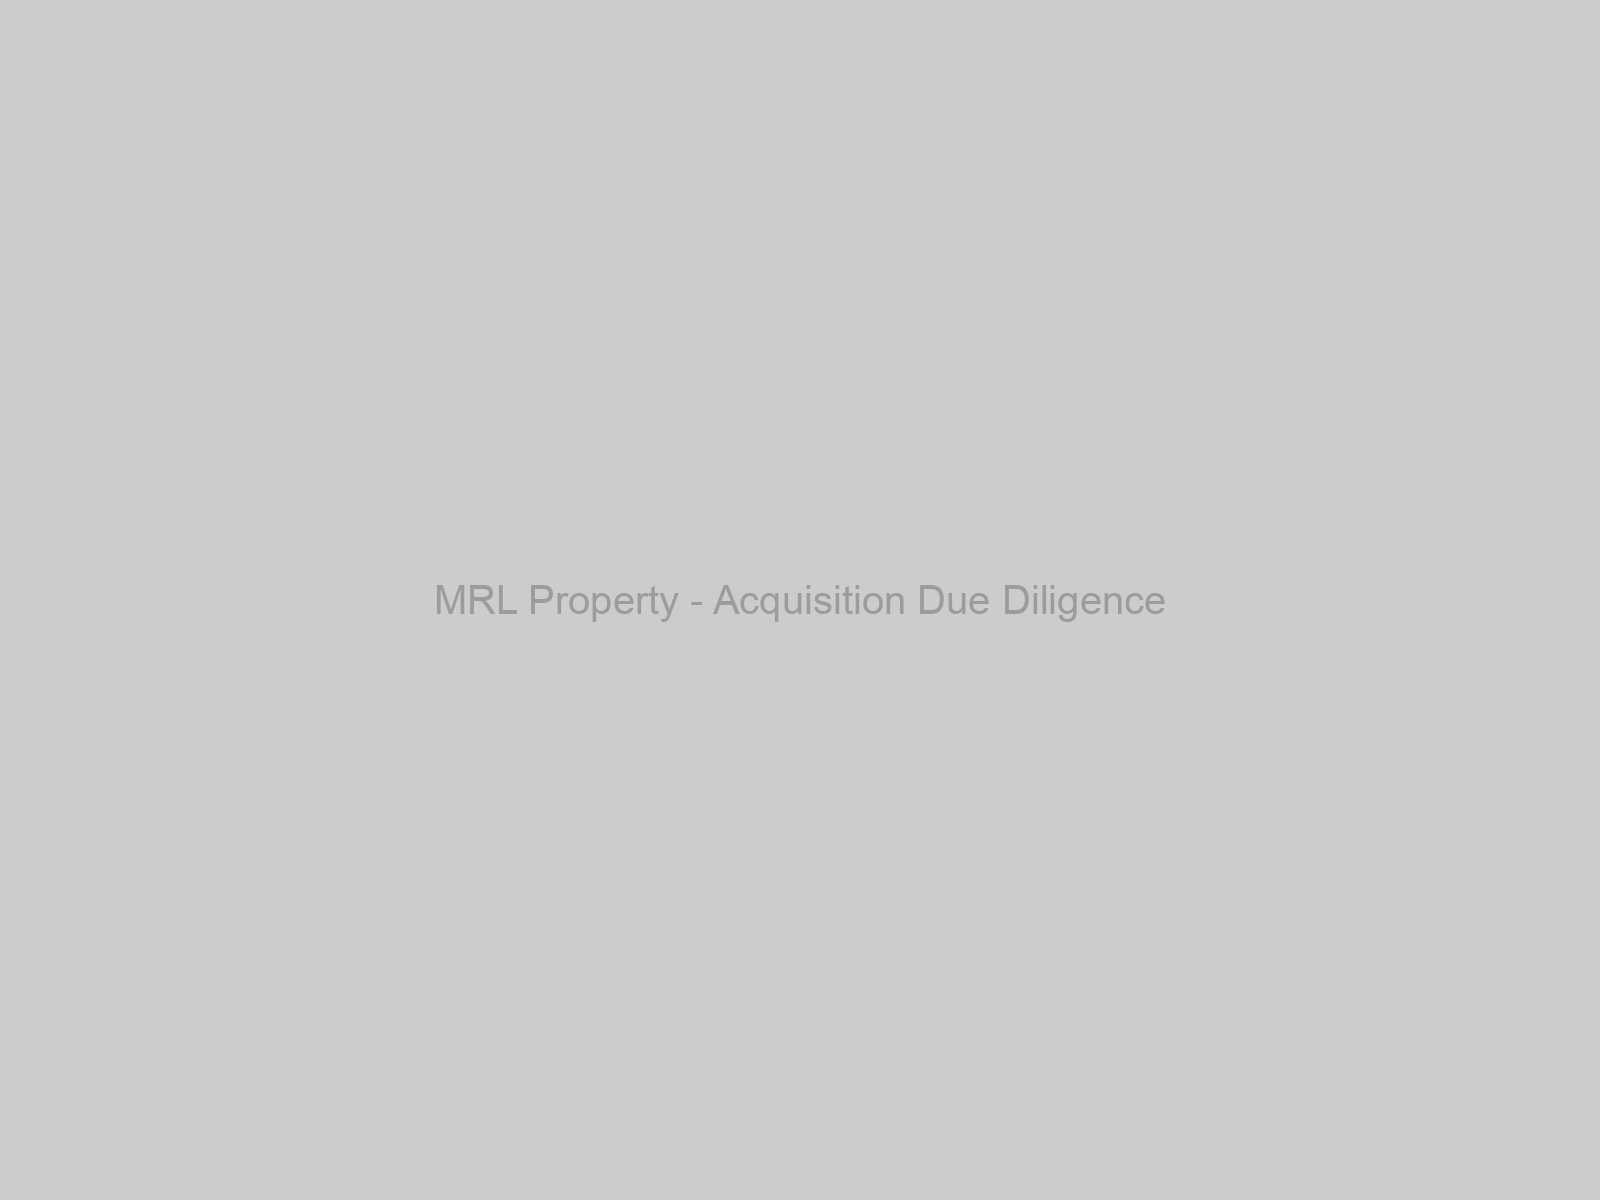 MRL Property - Acquisition Due Diligence